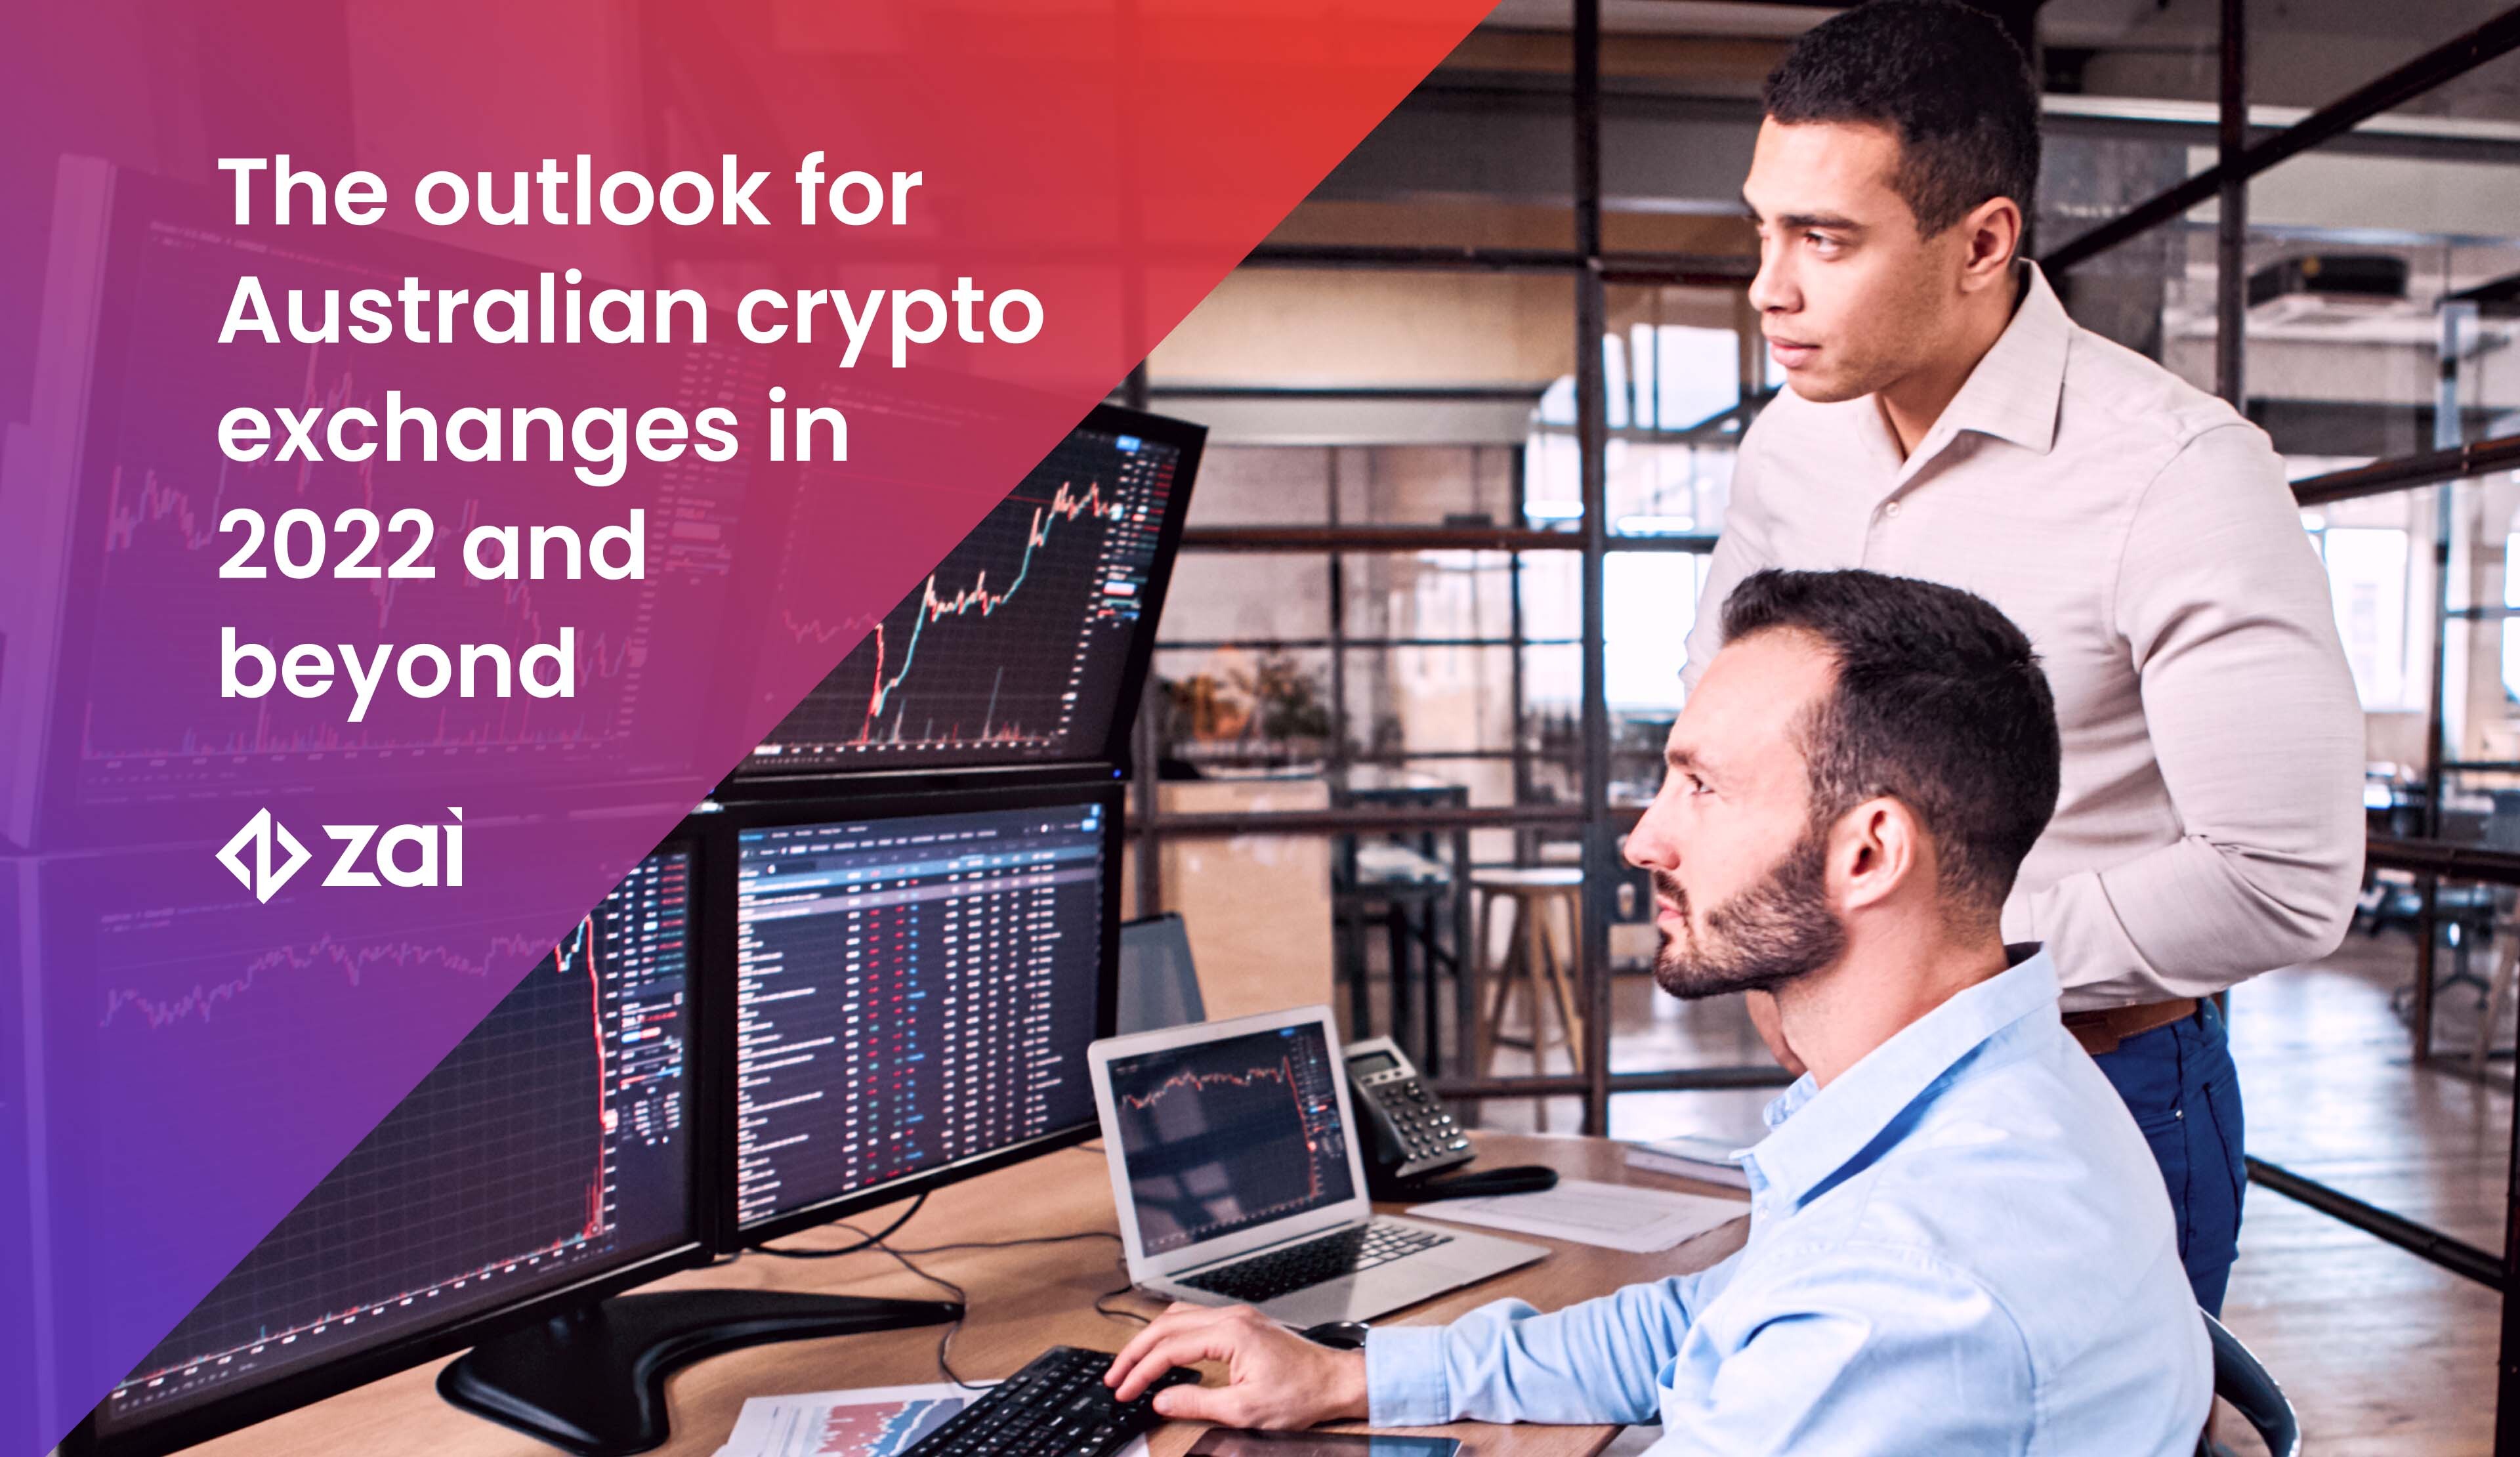 The outlook for Australian crypto exchanges in 2022 and beyond